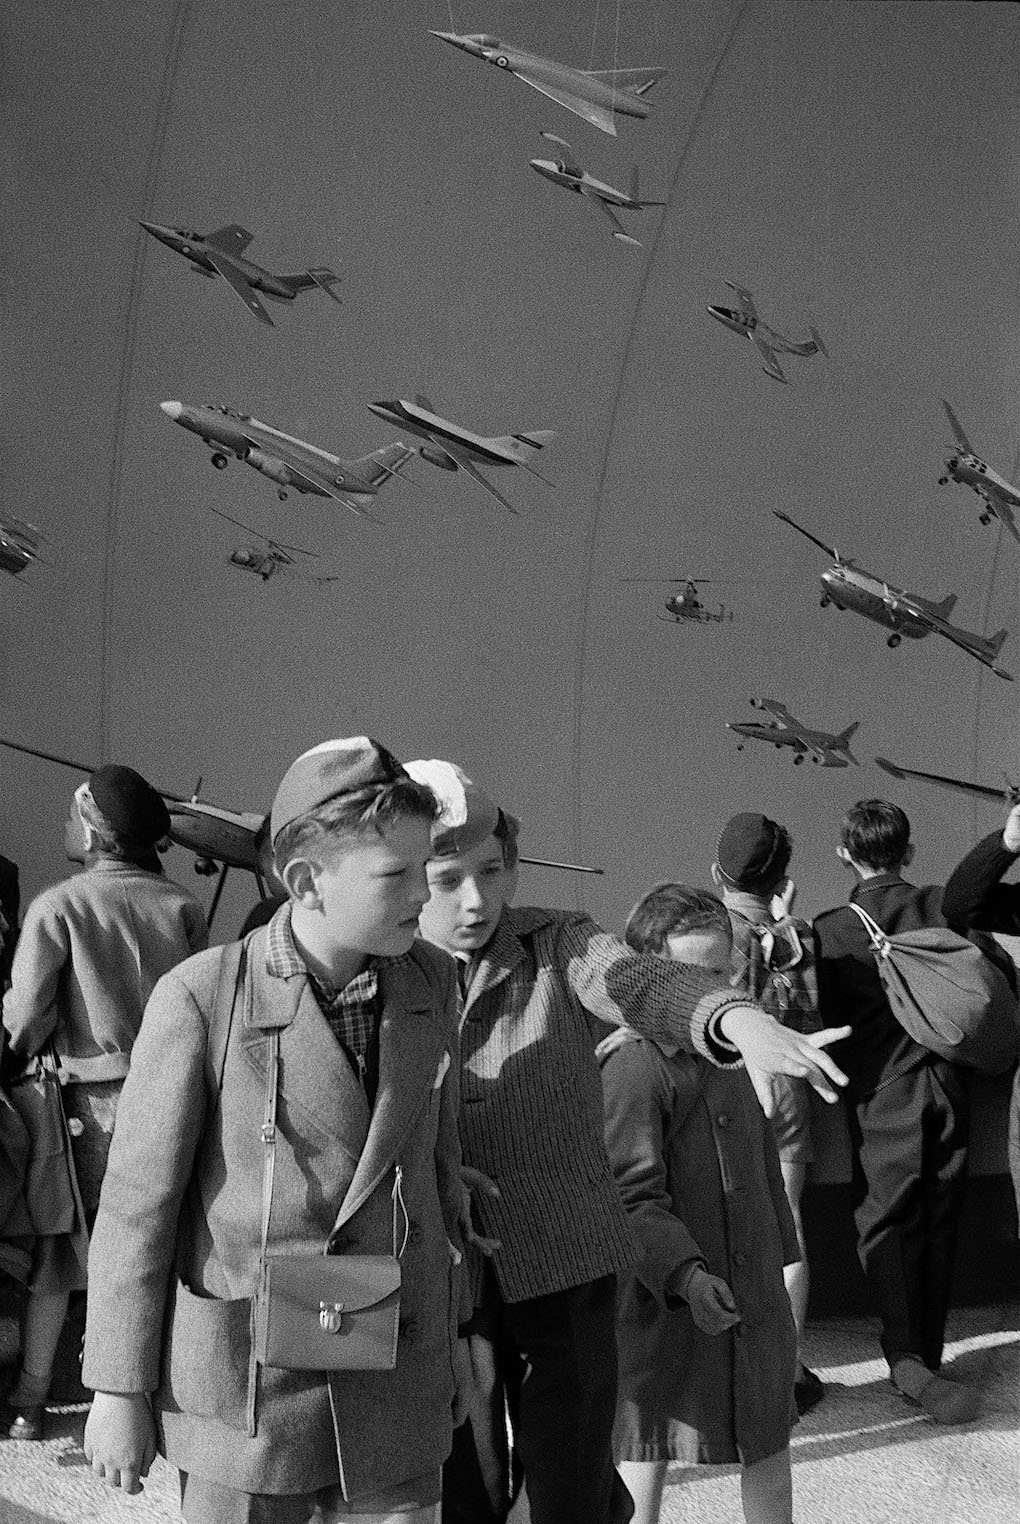 Henri Cartier-Bresson candid photograph of boys and war planes